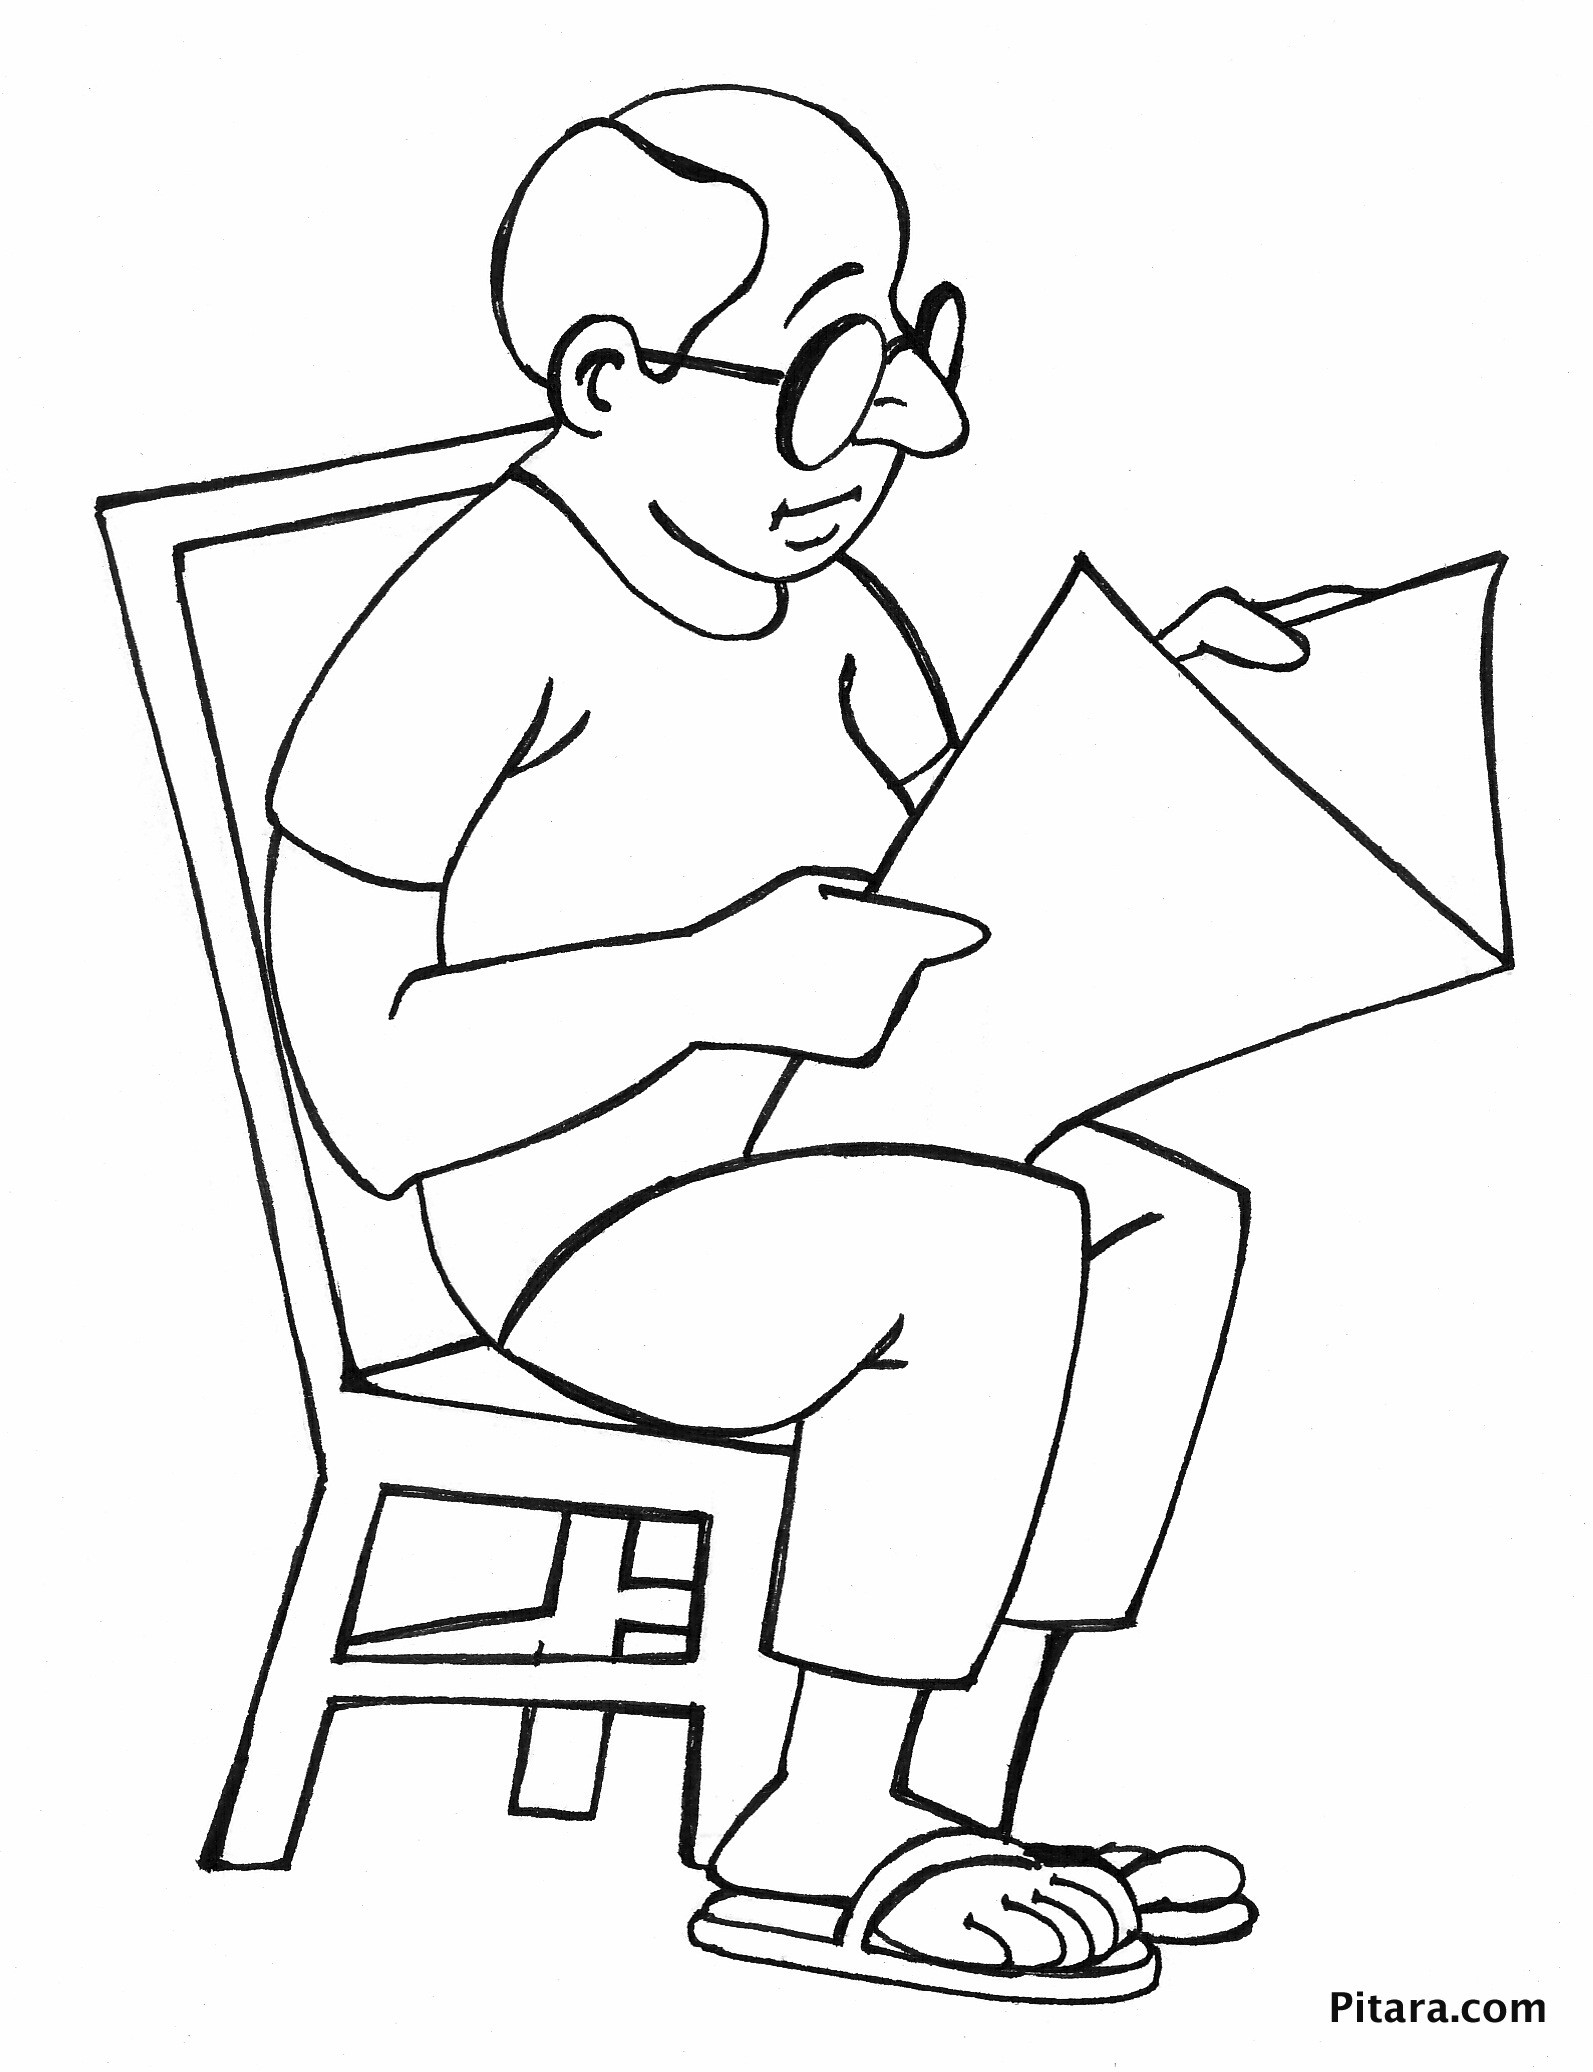 Kids Reading Coloring Pages
 Reading newspaper – Coloring page – Pitara Kids Network